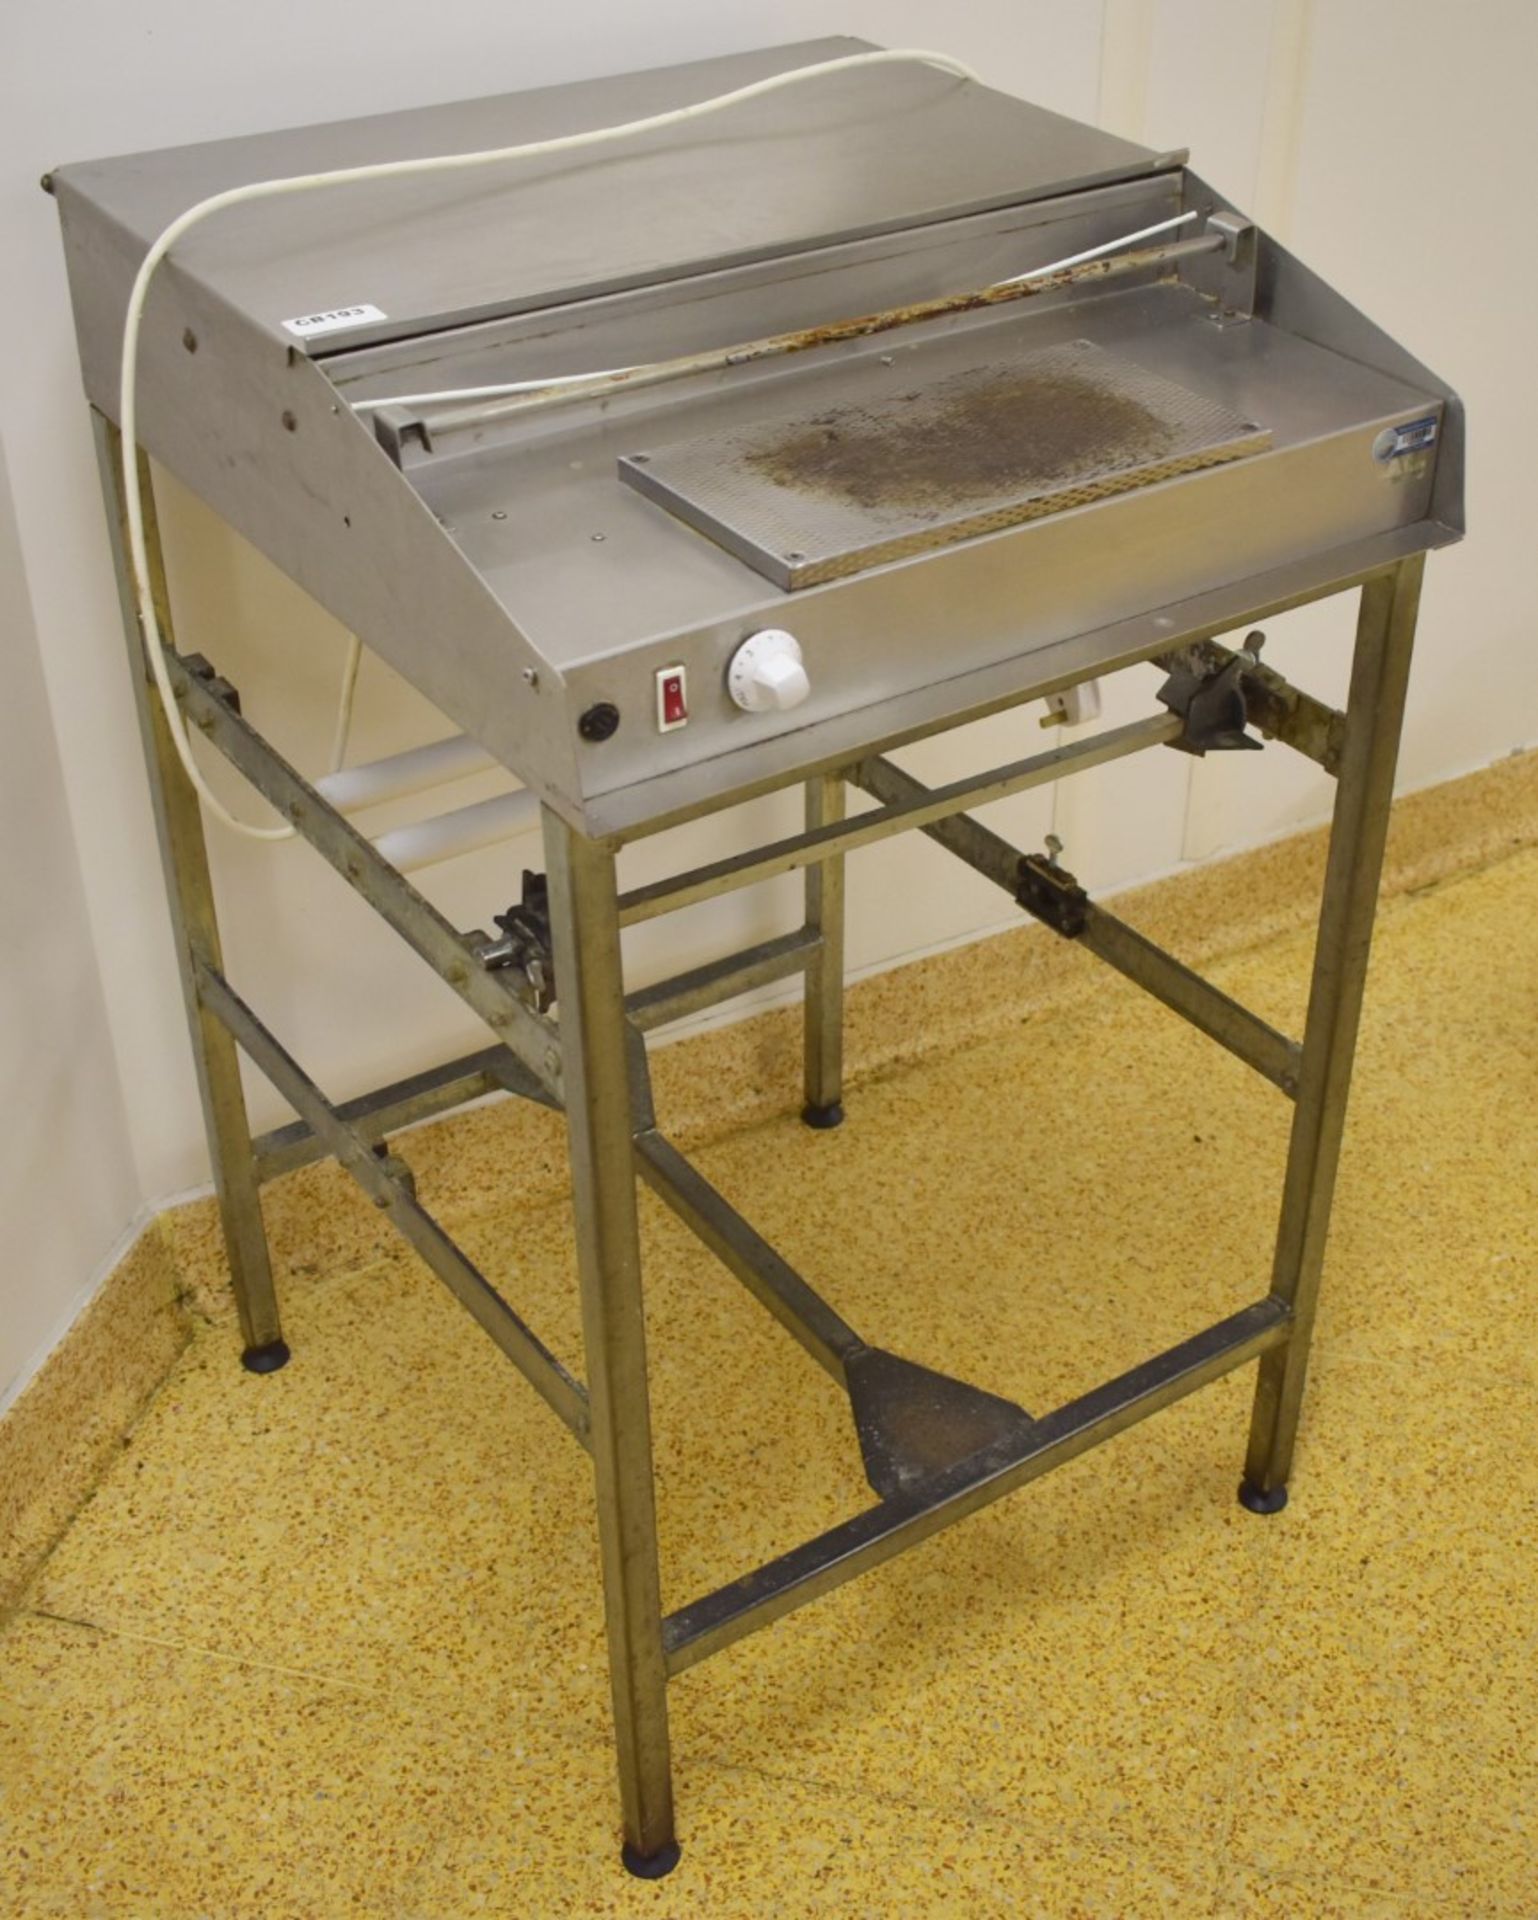 1 x Commercial Food Tray Sealer With Stand - Features Stainless Steel Finish and 240v Plug - H96 x - Image 2 of 3